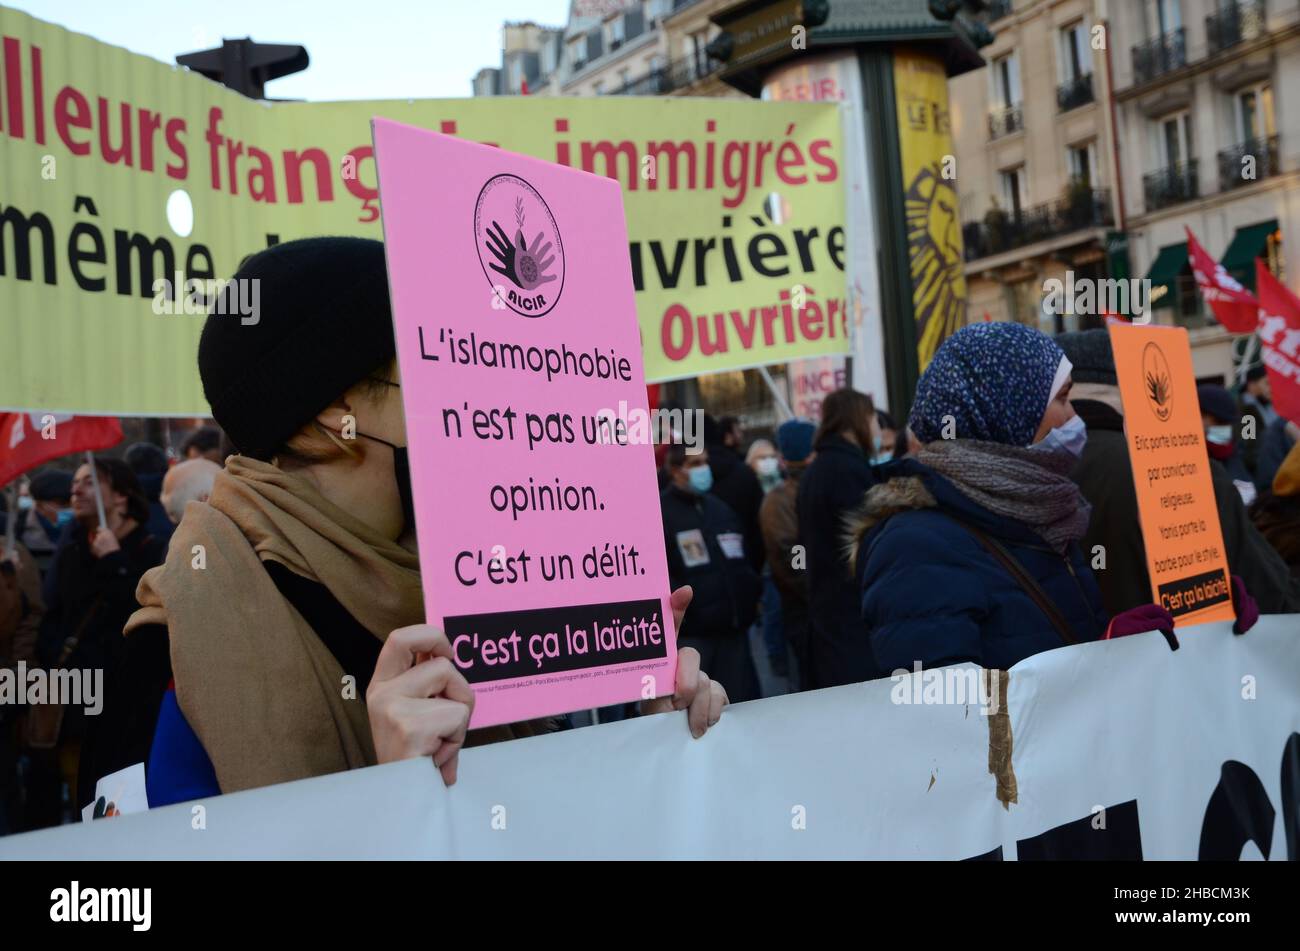 A demonstration was organized in Paris for the International Day of Migrants. The slogan was 'solidarity'several hundred people responded present Stock Photo